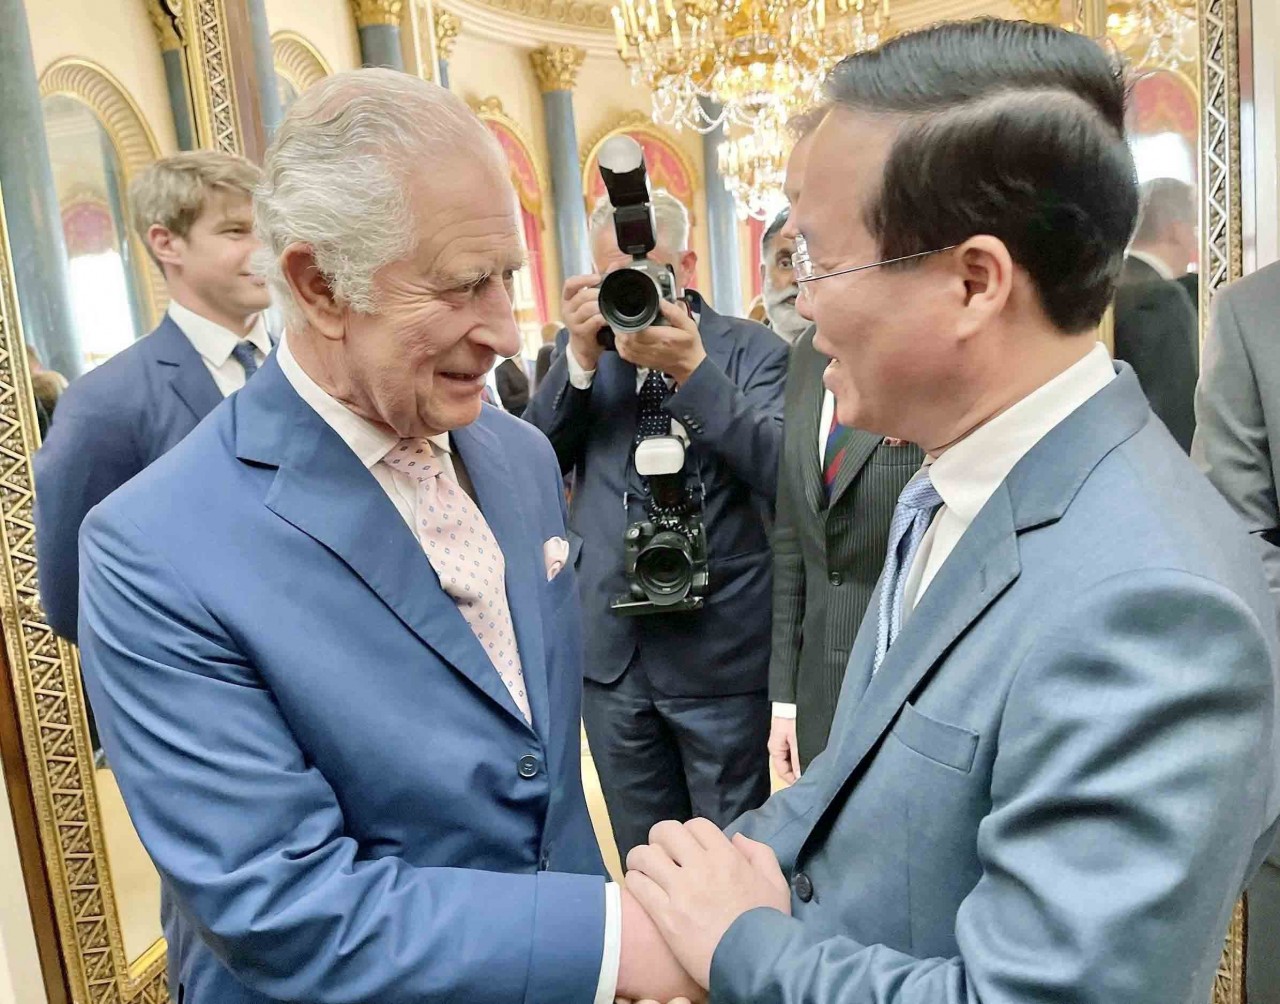 Review on external affairs from May 1-7: President’s attendance at King Charles III’s coronation, Vietnam-Luxembourg established new pillar of coopera